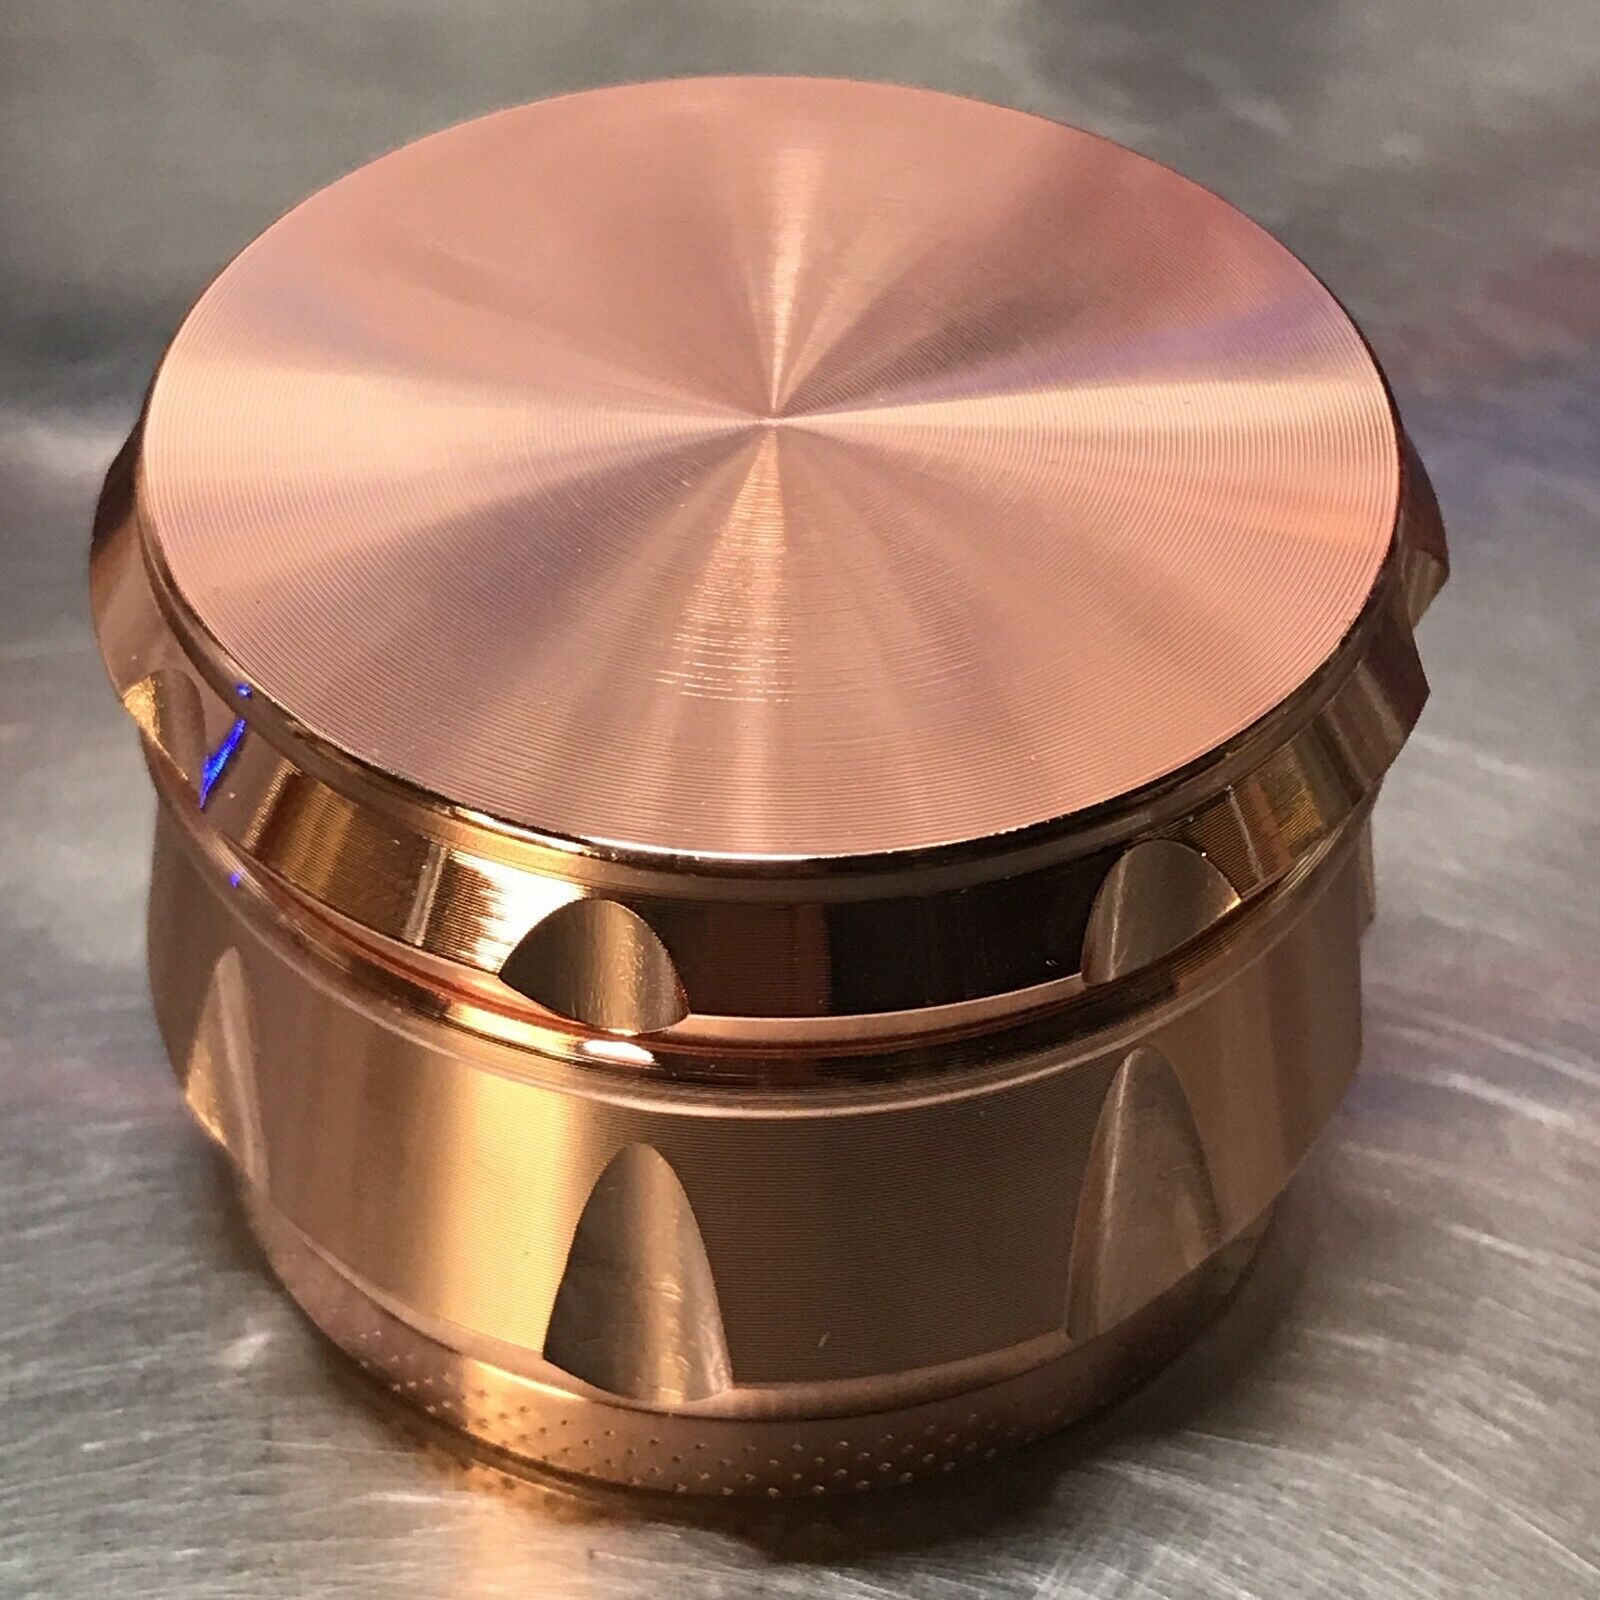 2.2 Inch 4 Piece Metal Large Dry Herb Spice Tobacco Grinder Crusher Rose Gold